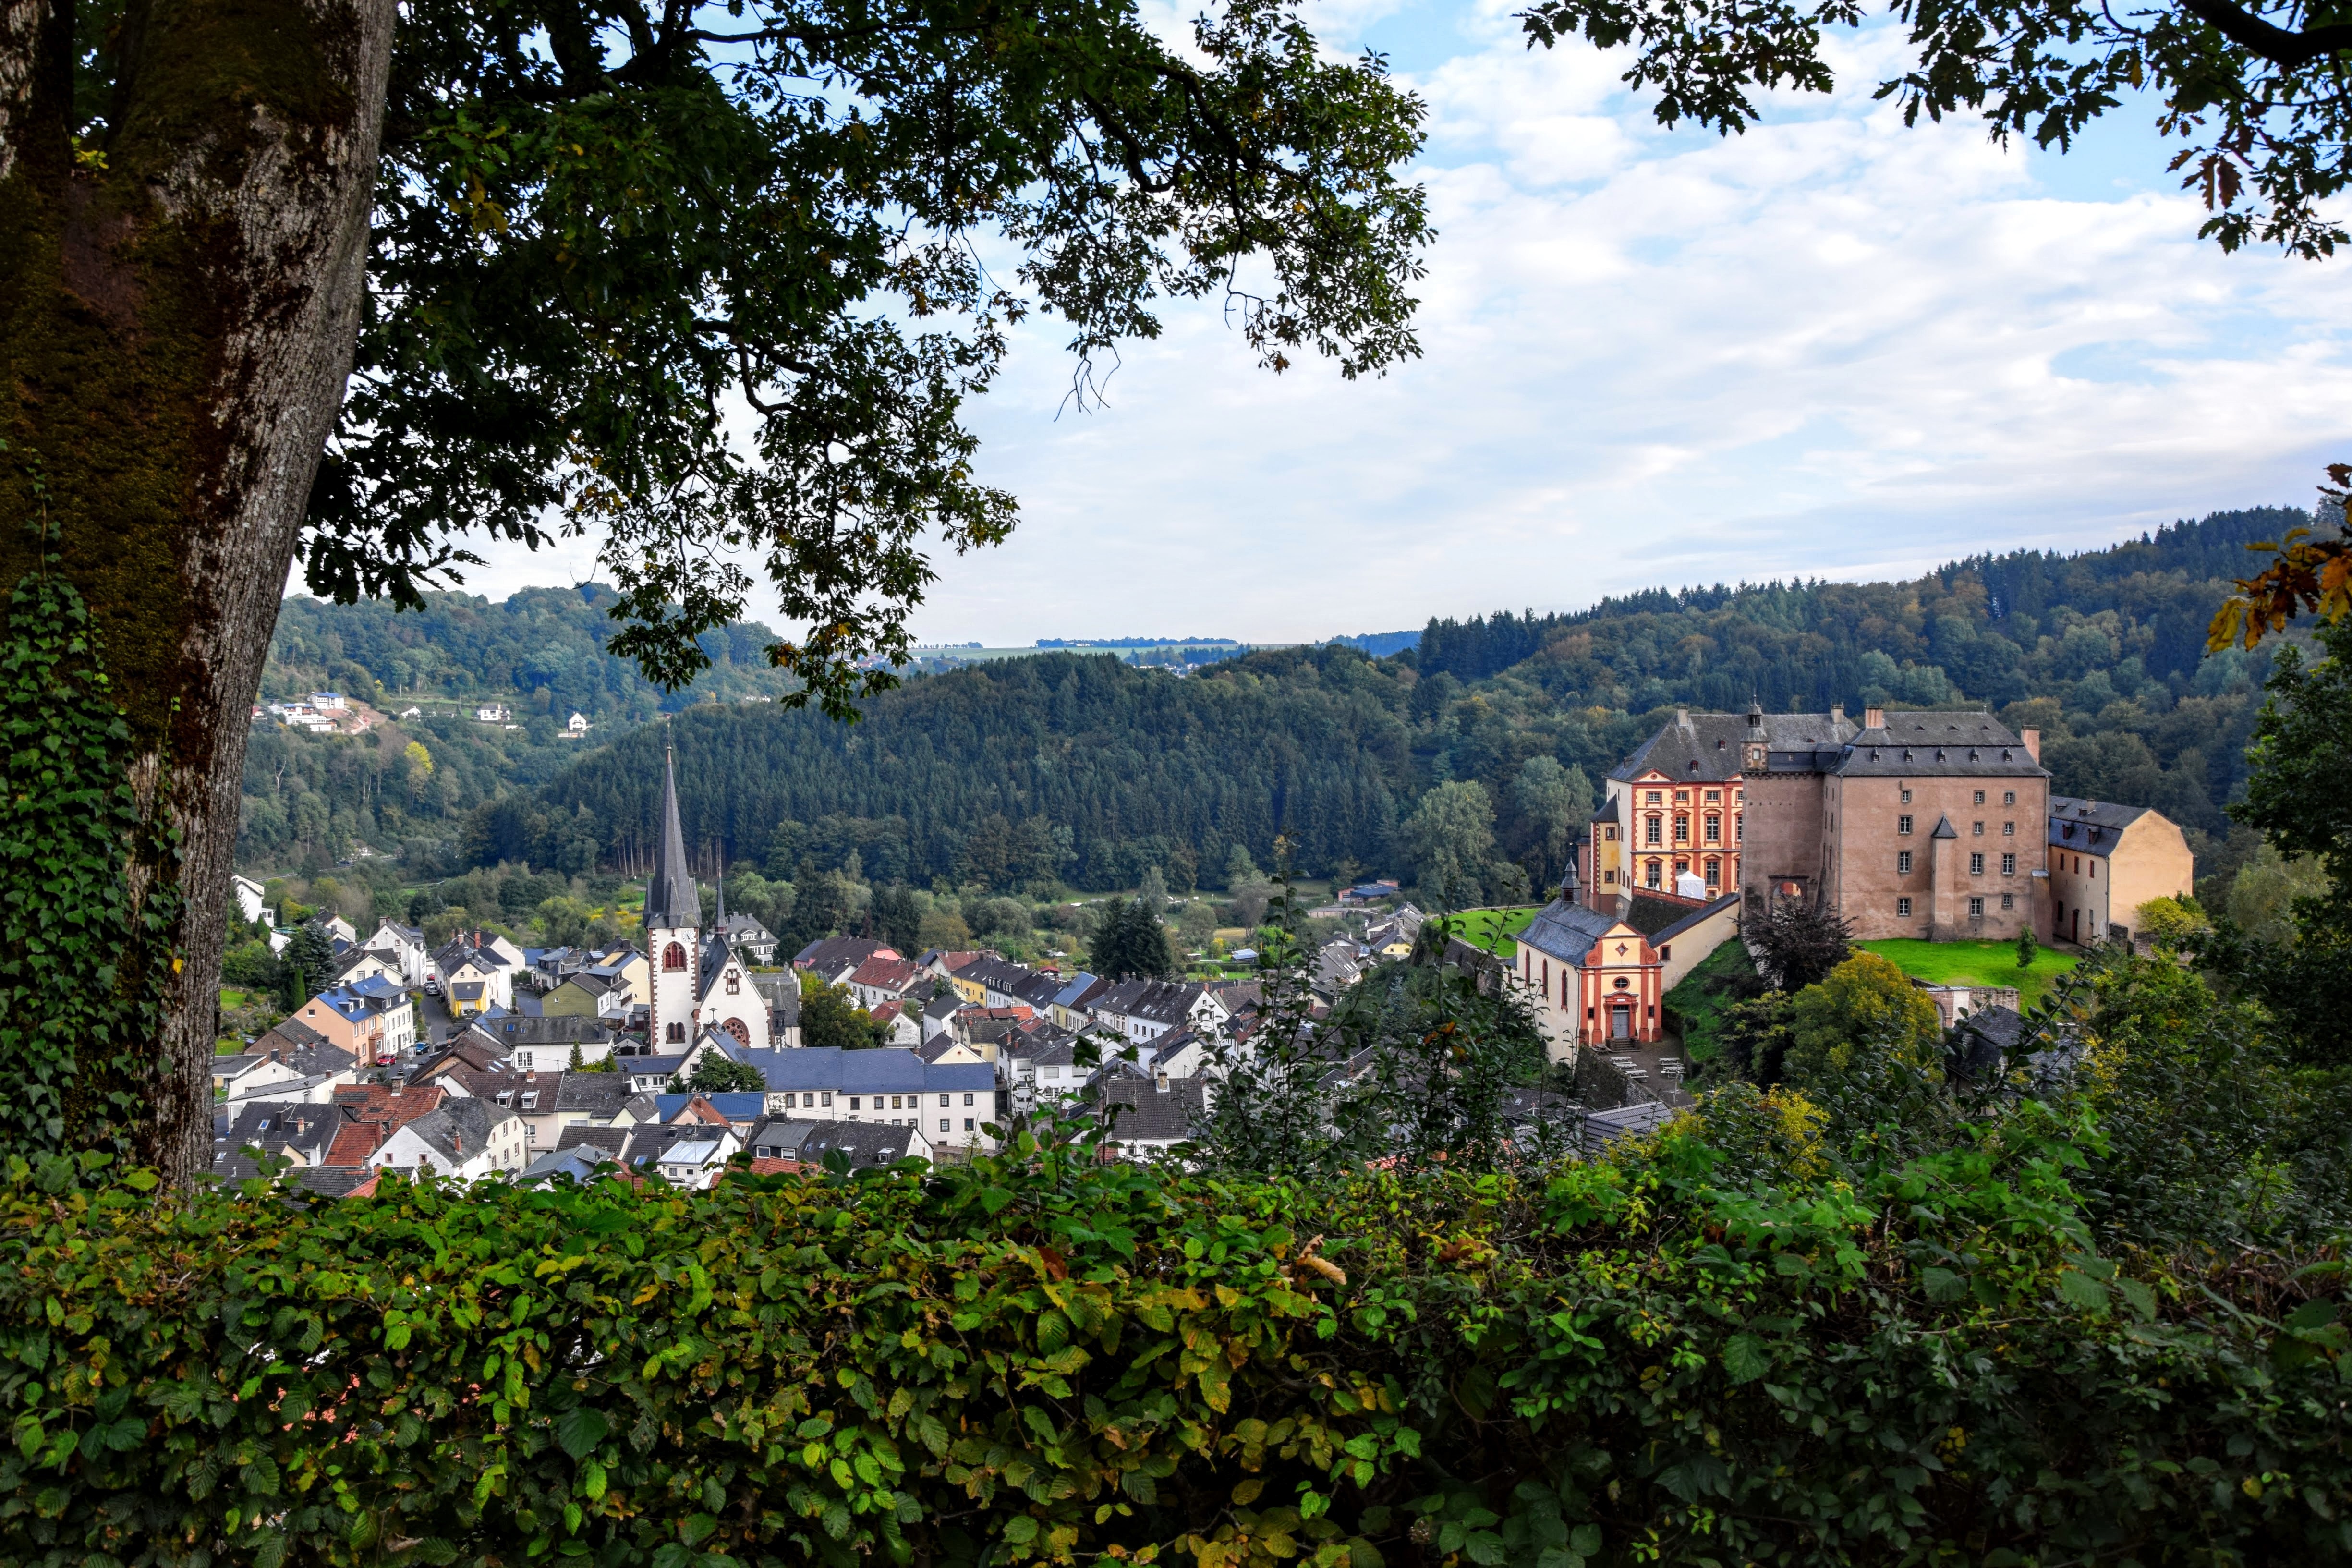 germany, cities, trees, architecture, building, malberg